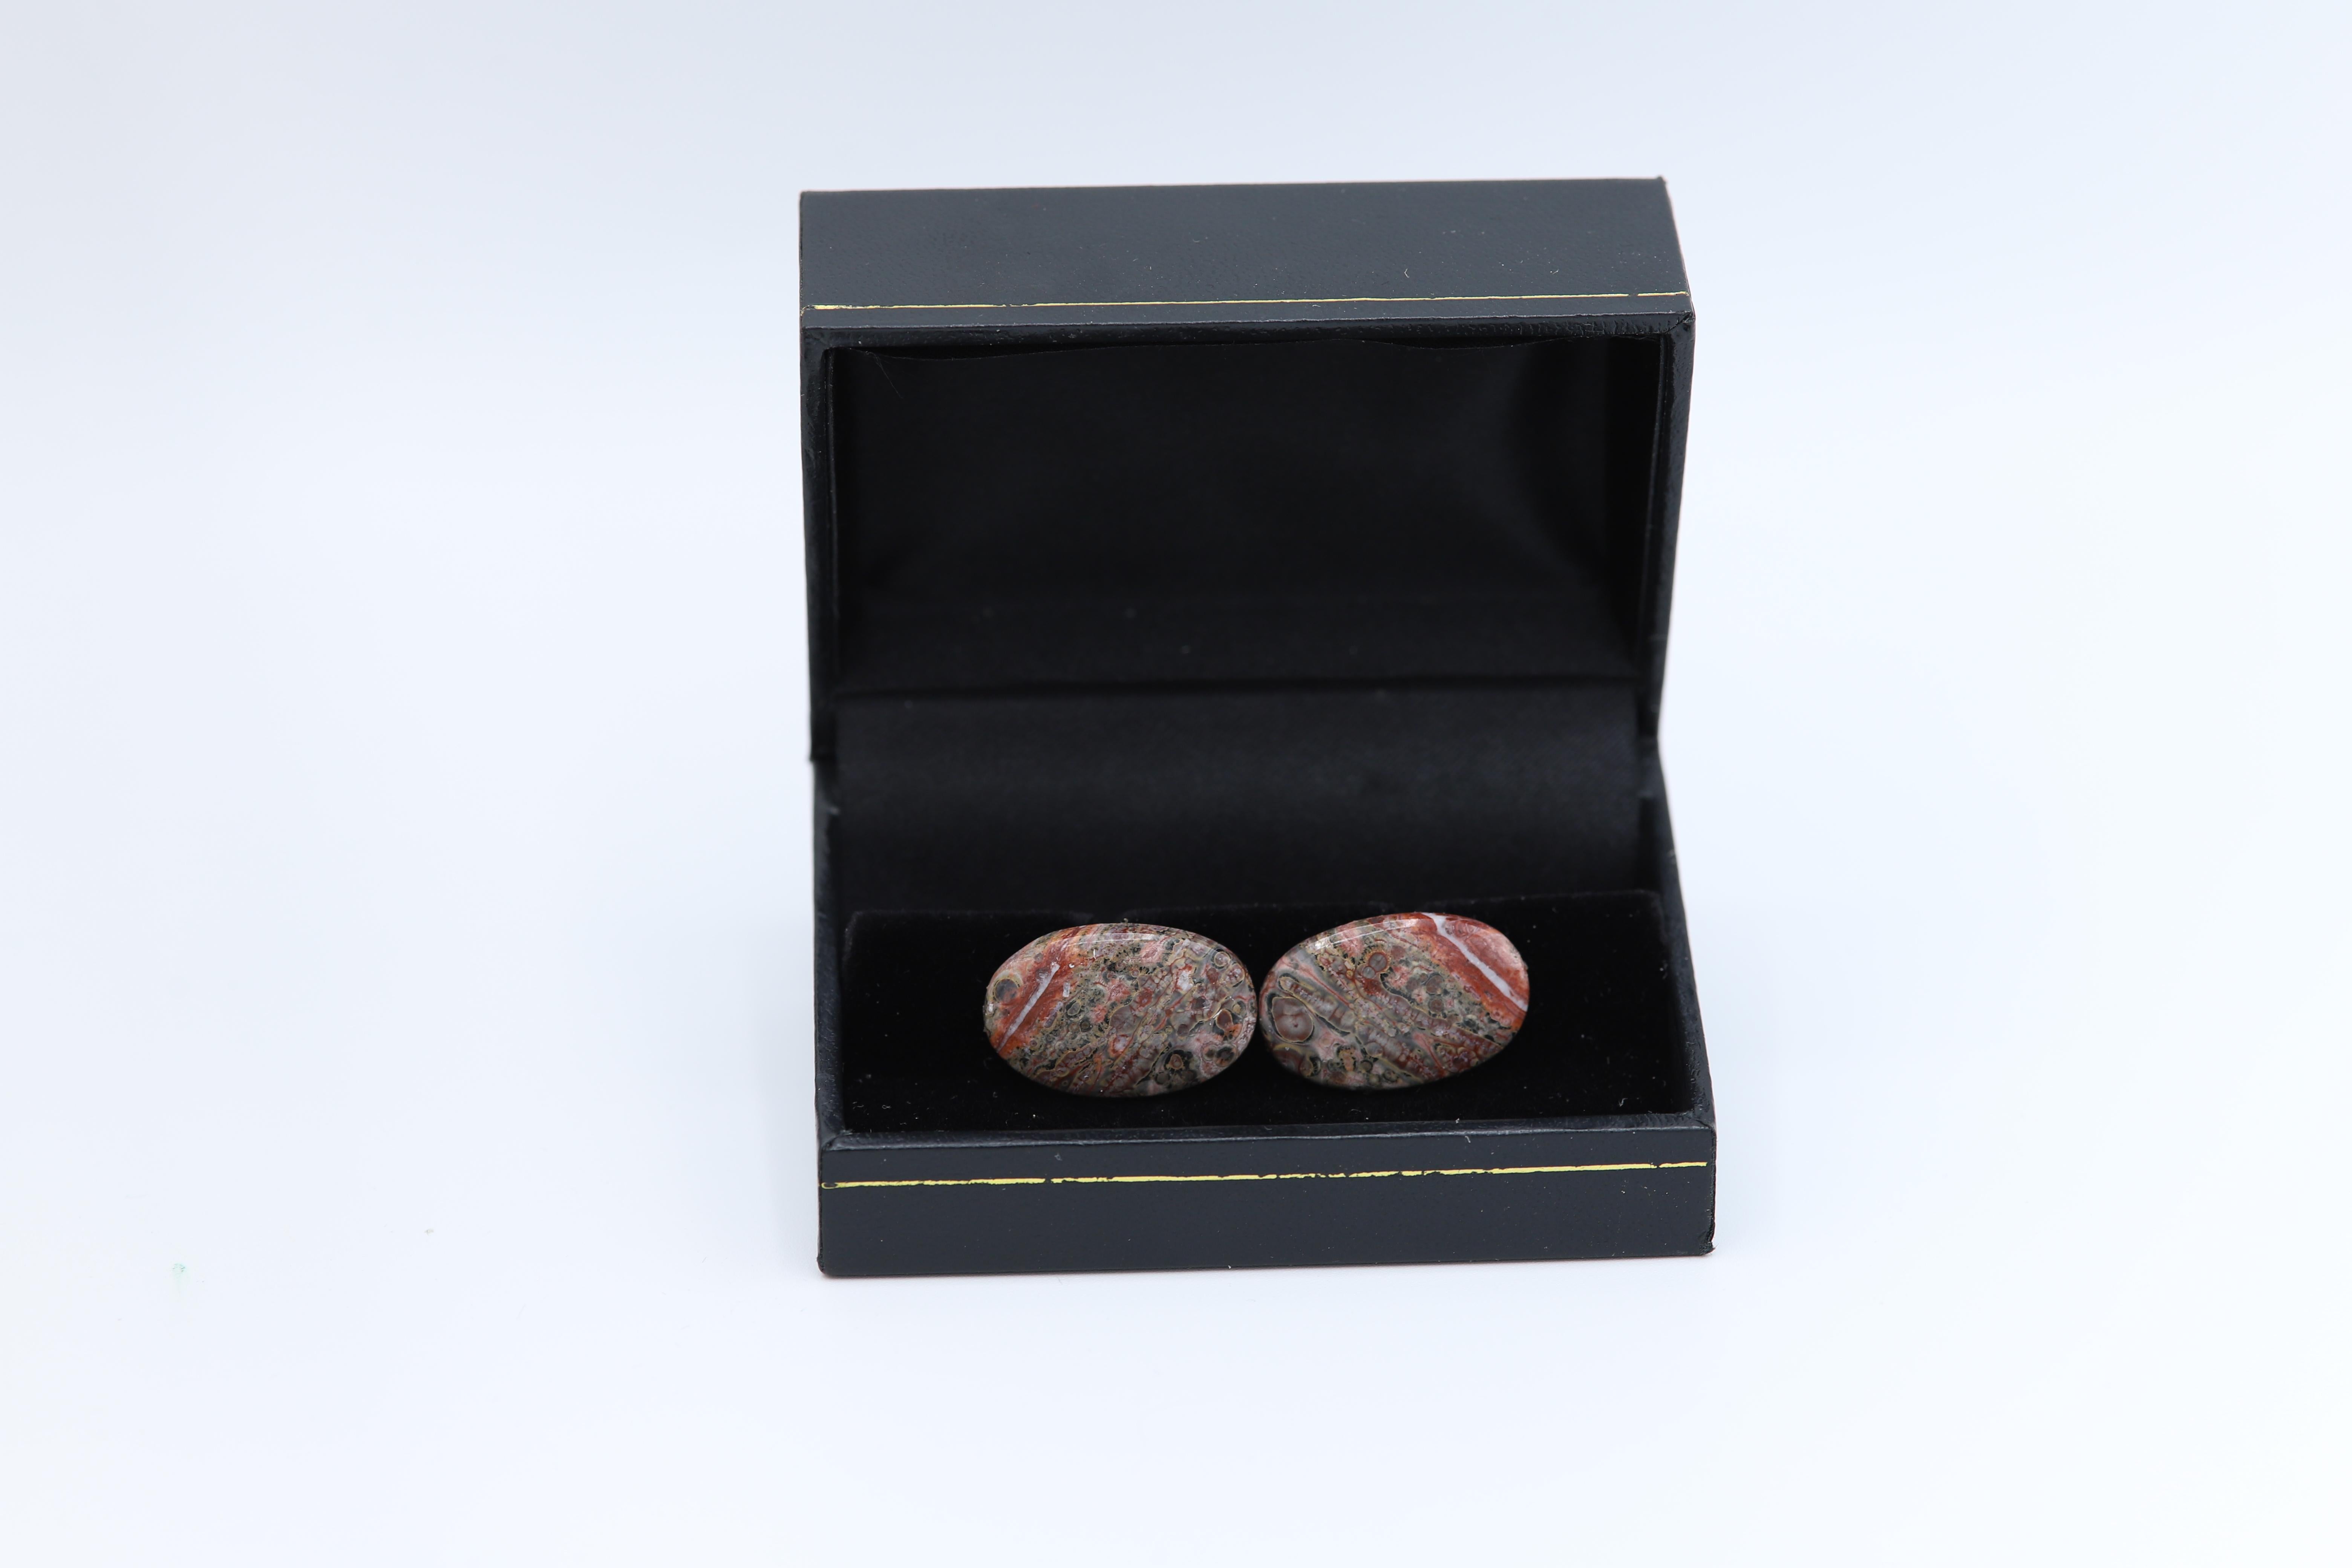 New unique men's cufflink - natural stone.
Stone name: Leopard skin Jasper
Approx. size 22 X 14 MM
Beautiful natural texture.
Imperfection may exist due to natural formations.
Back part metal is a general alloy metal - none precious
Gift Box